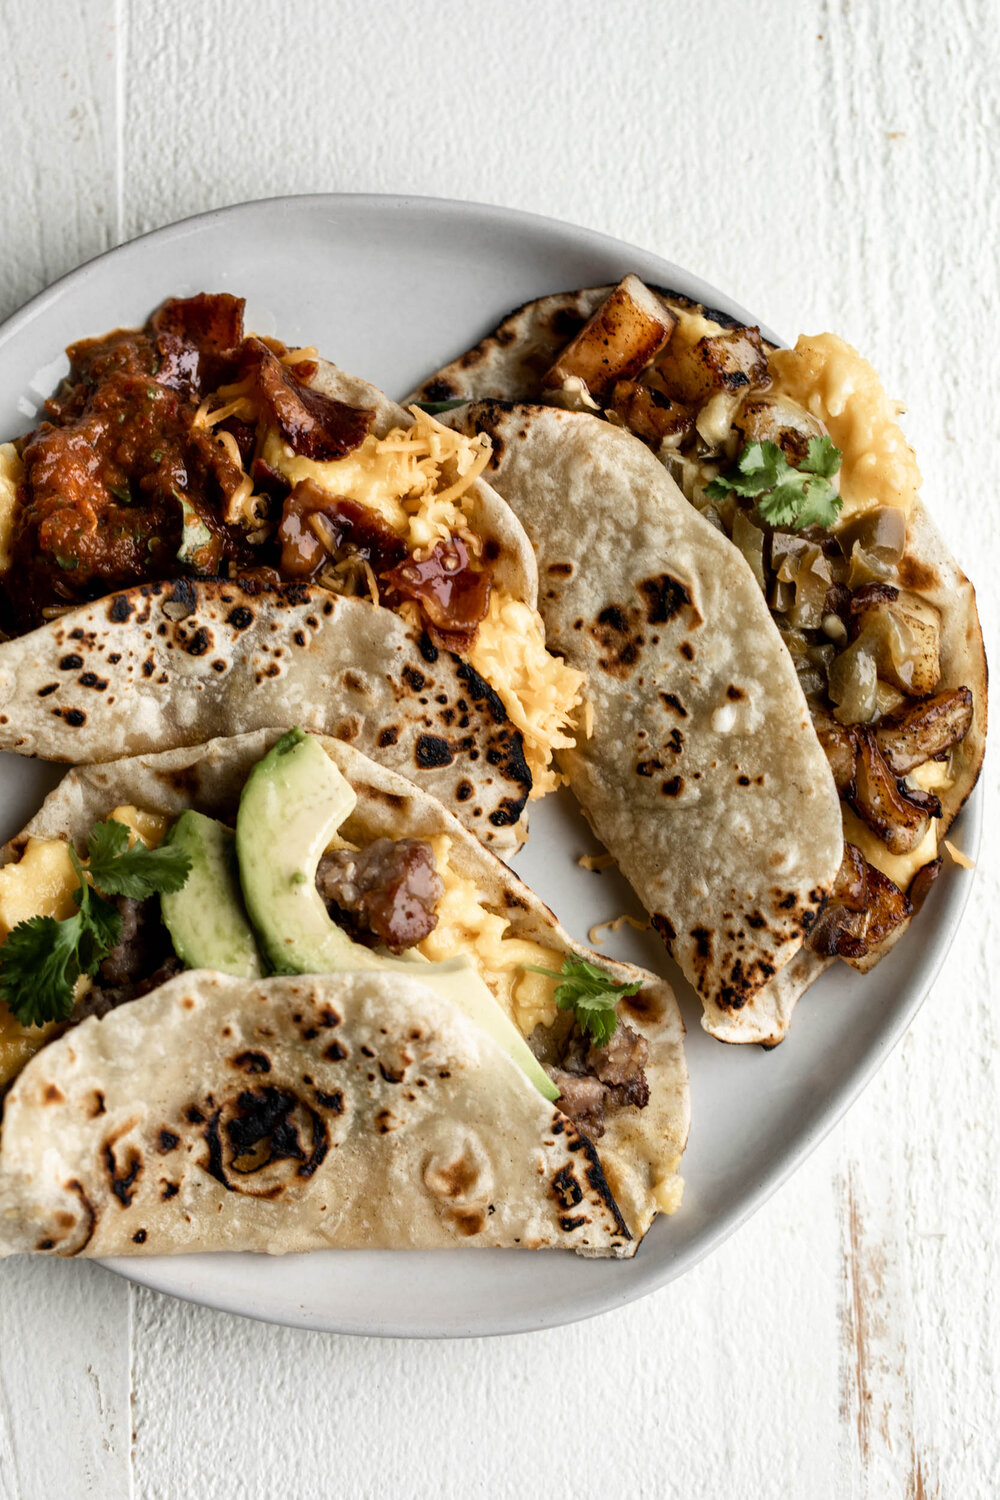 Breakfast taco bar with homemade tortillas made with potatoes, cheese bacon and susage